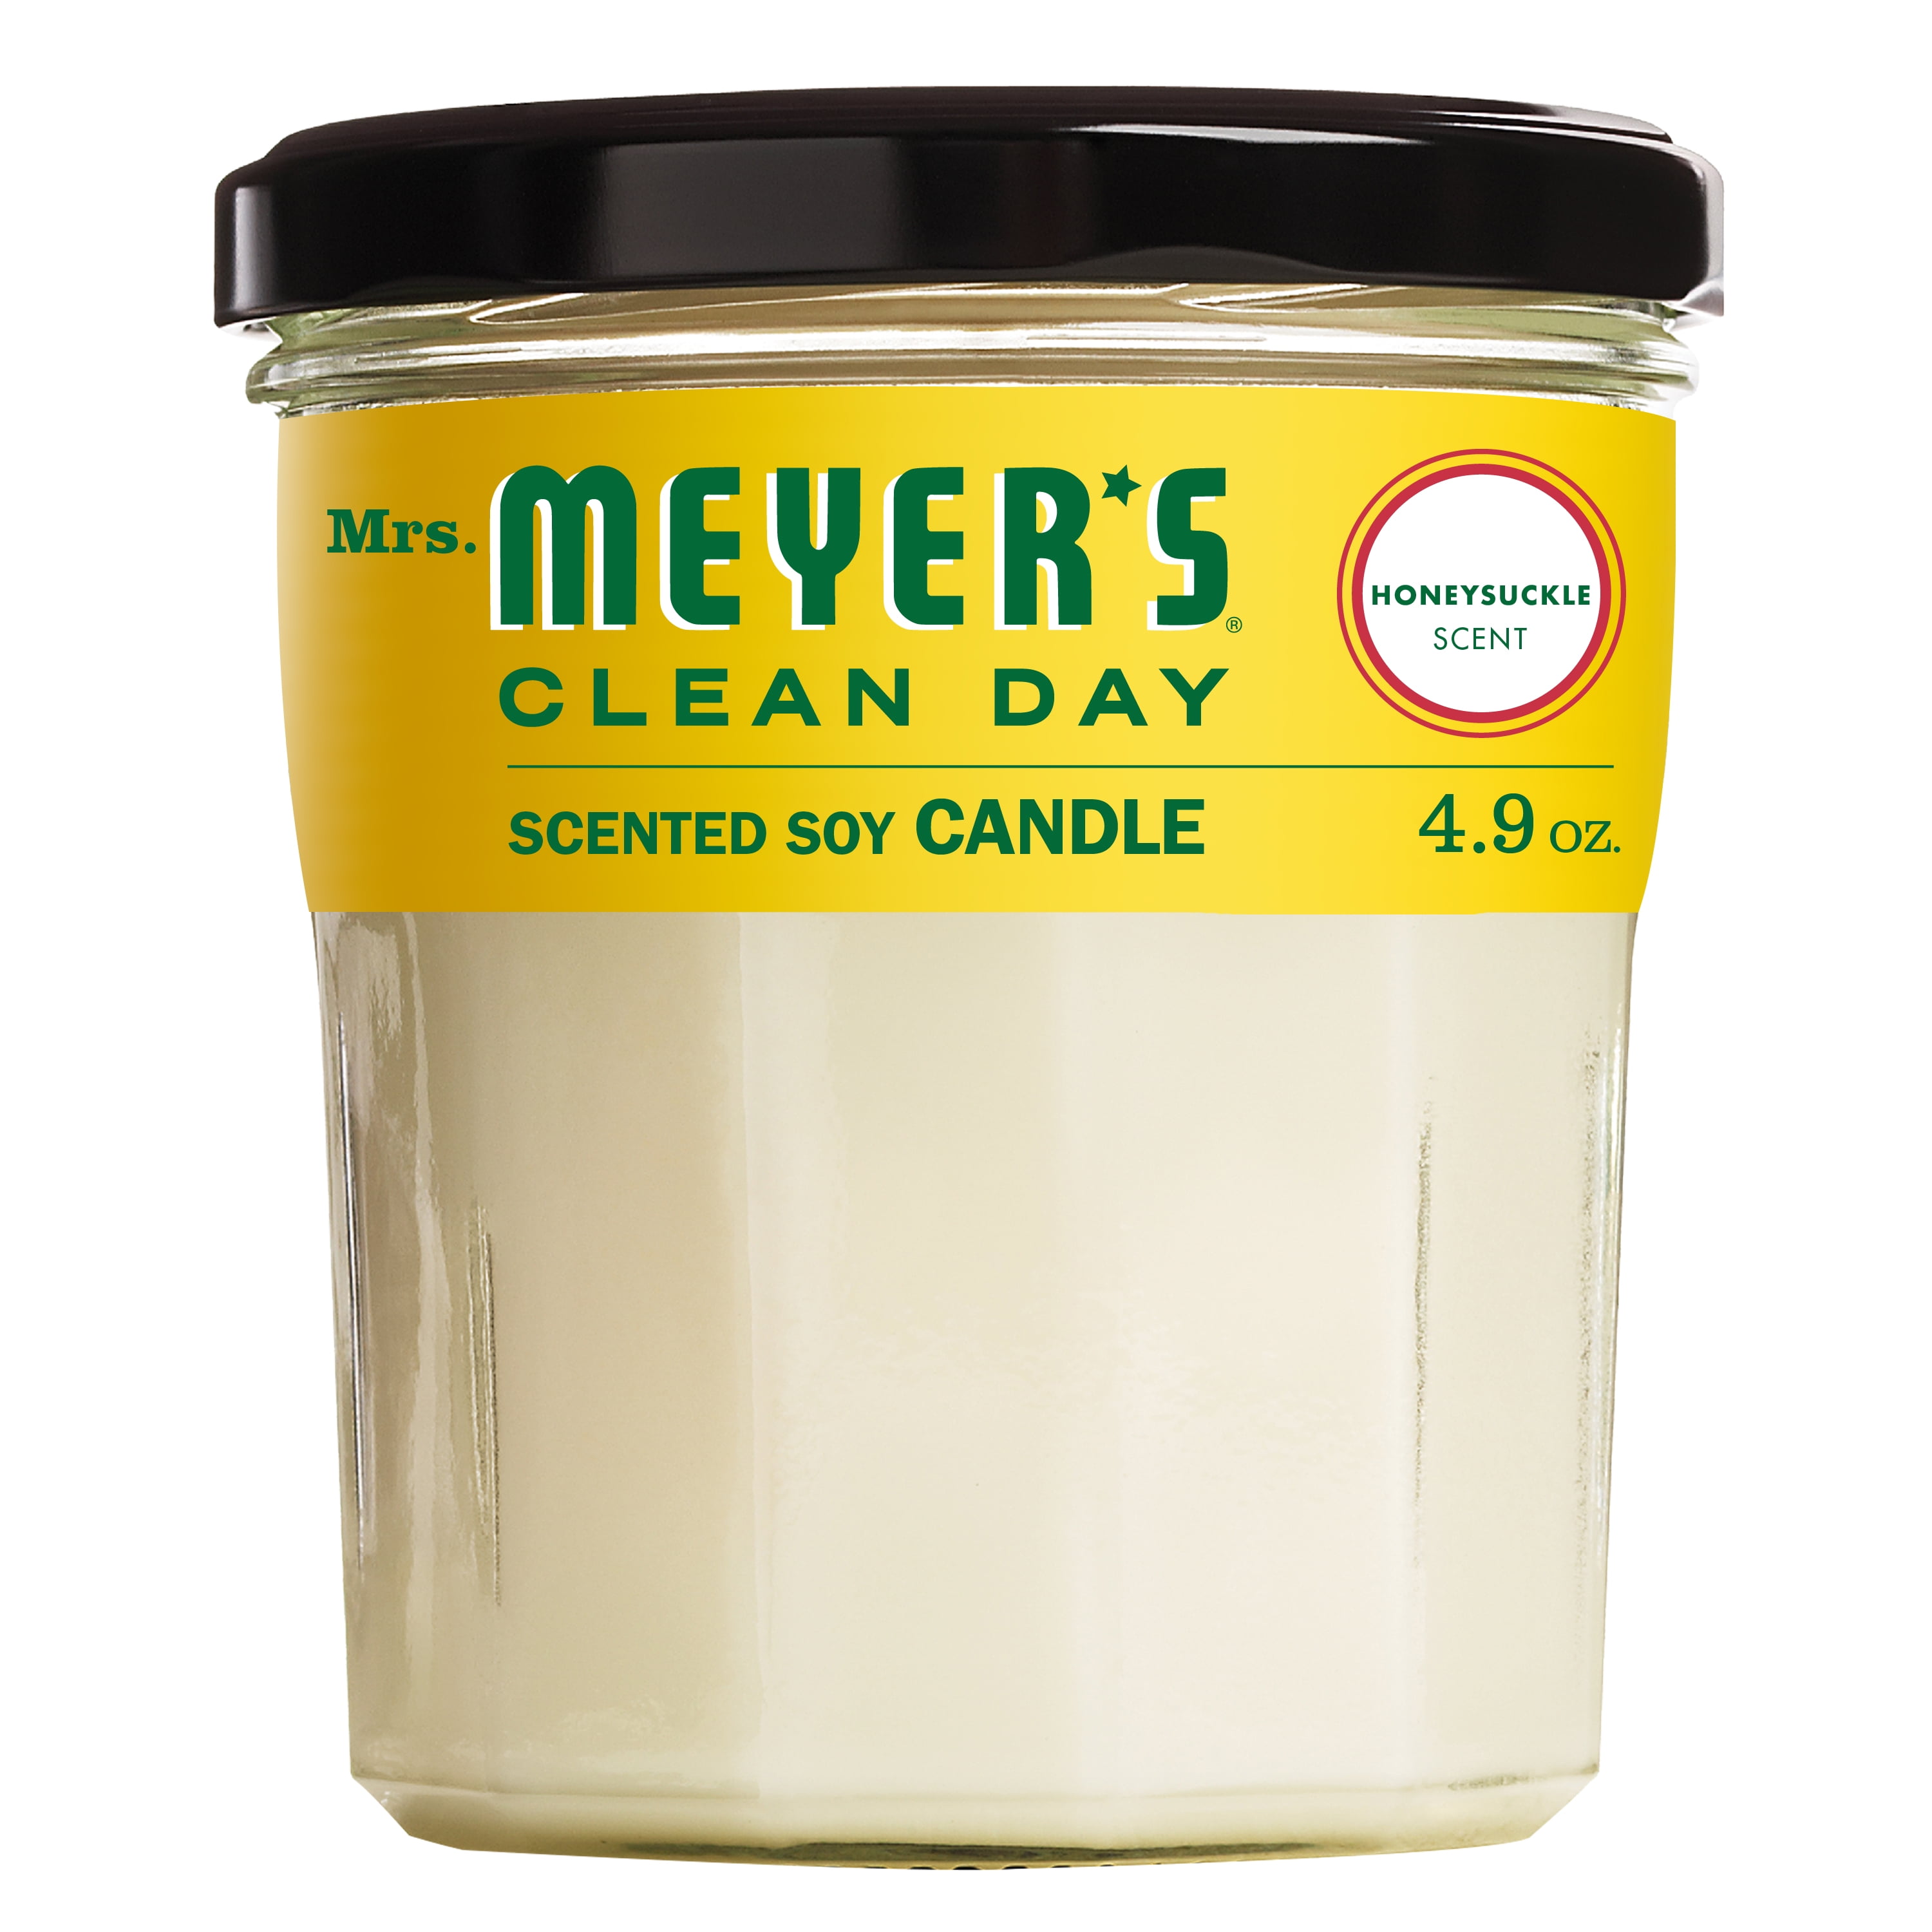 Mrs Apple Cider Scent 4.9 Ounce Candle Meyer’s Clean Day Scented Soy Candle